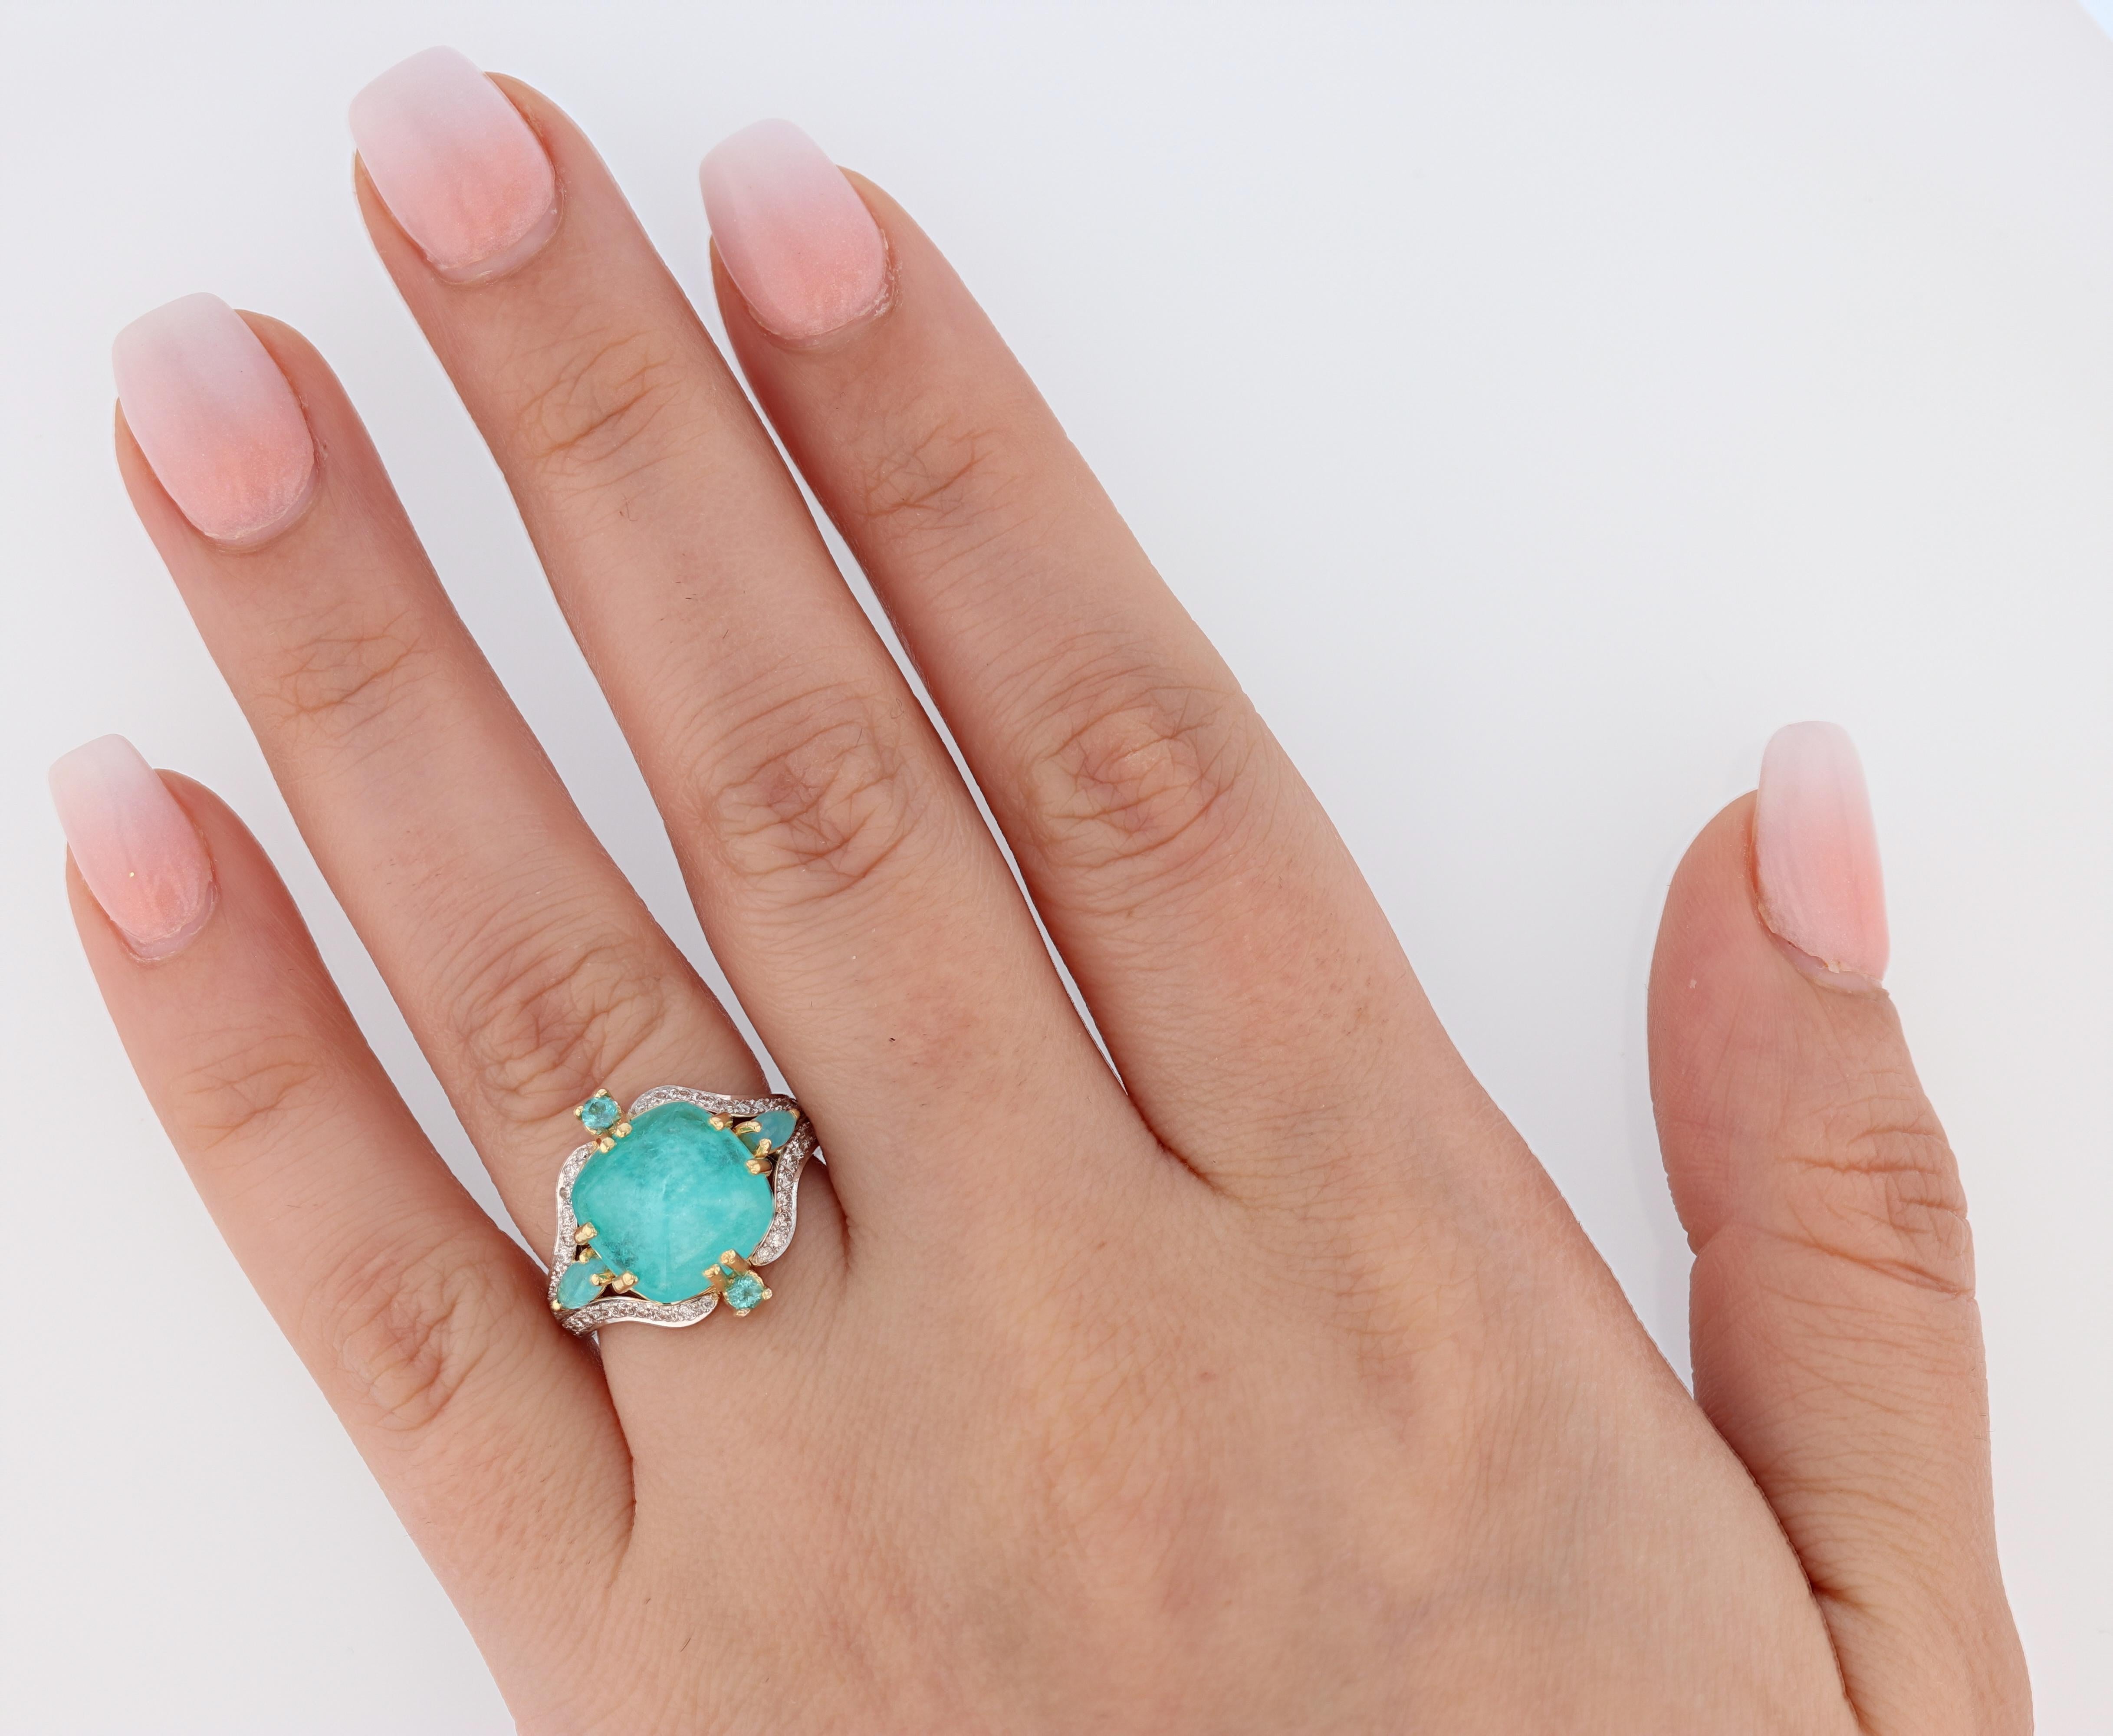 This ring is made in 18k white and yellow gold and features a 5.10 ct cabochon Gia certified paraiba Tourmaline prong set for the center stone. The certificate is 